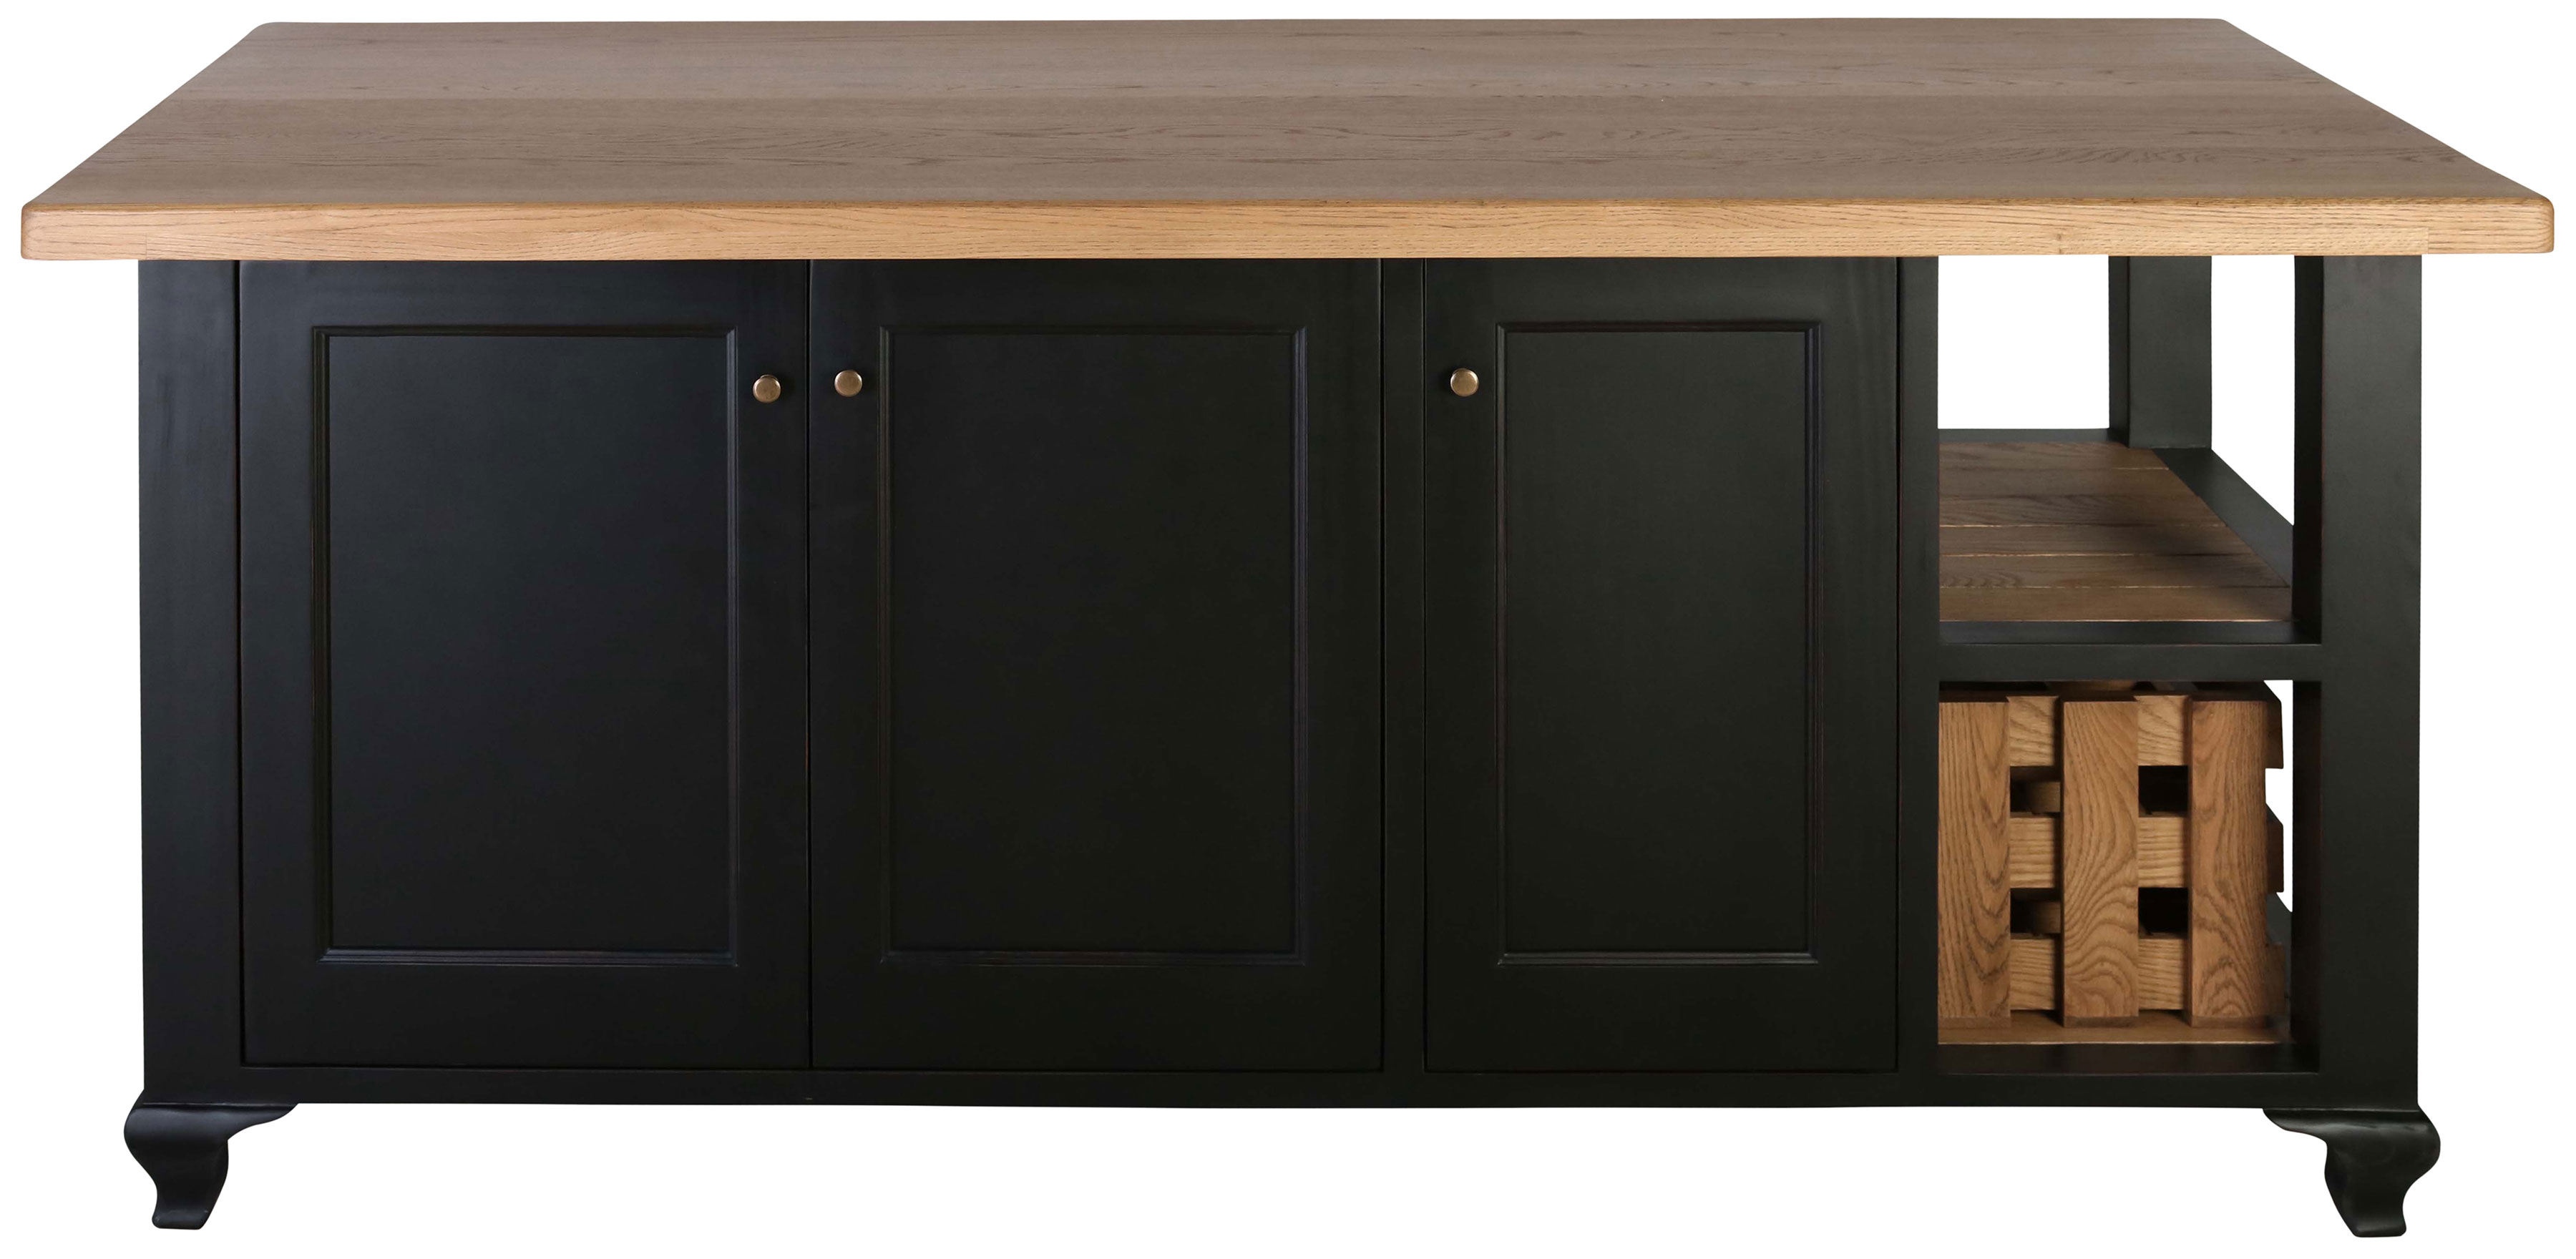  Block & Chisel Kitchen Island in Matt Black Lacquer and Weathered Oak 